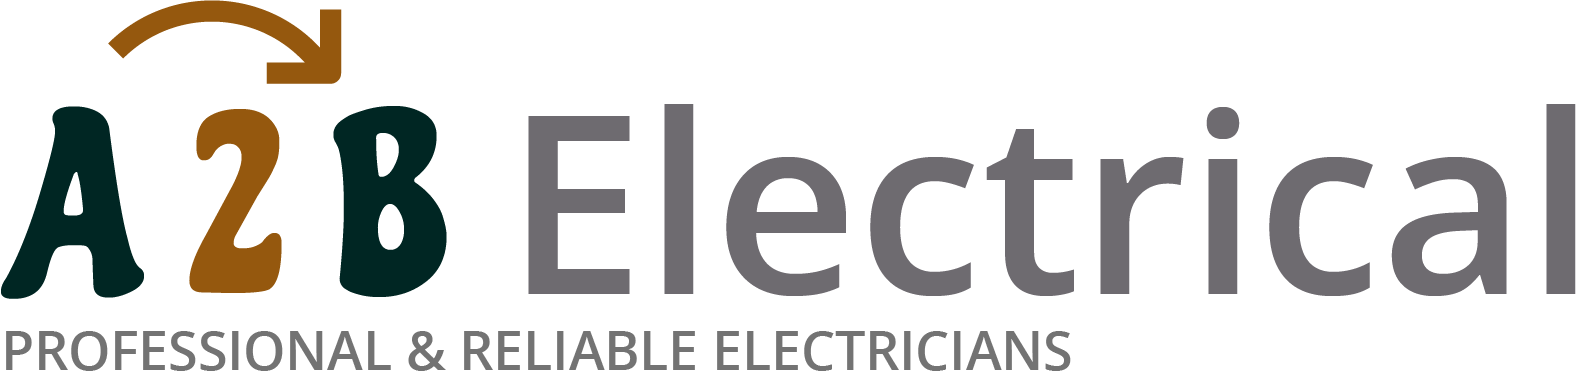 If you have electrical wiring problems in Dalton In Furness, we can provide an electrician to have a look for you. 